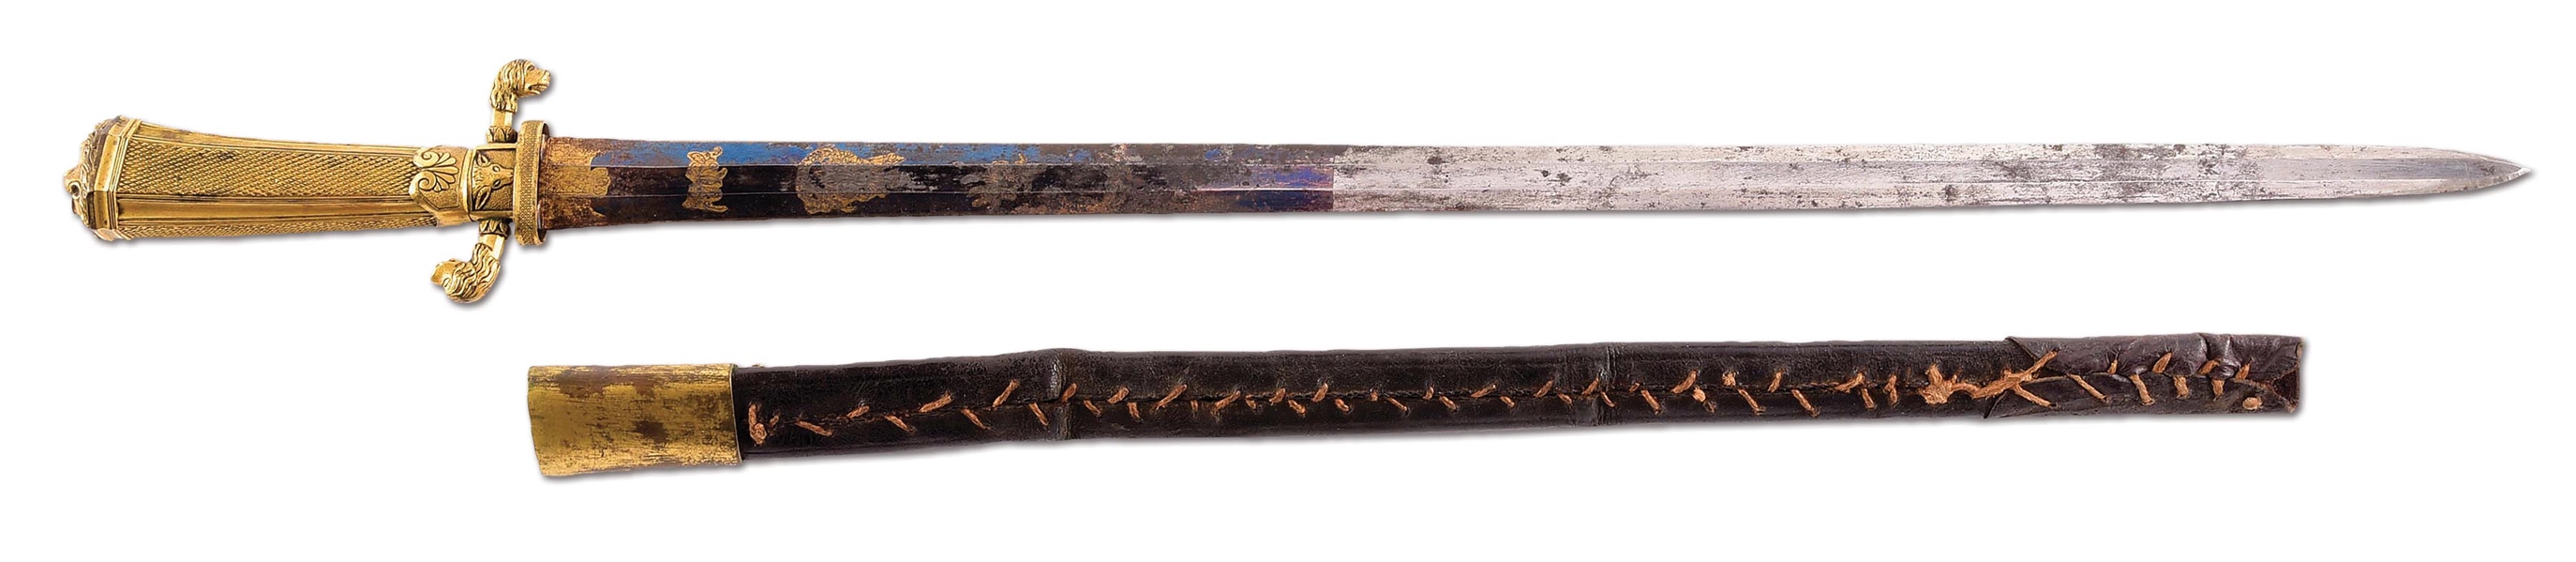 LATE 1700S FRENCH HUNTING SWORD.